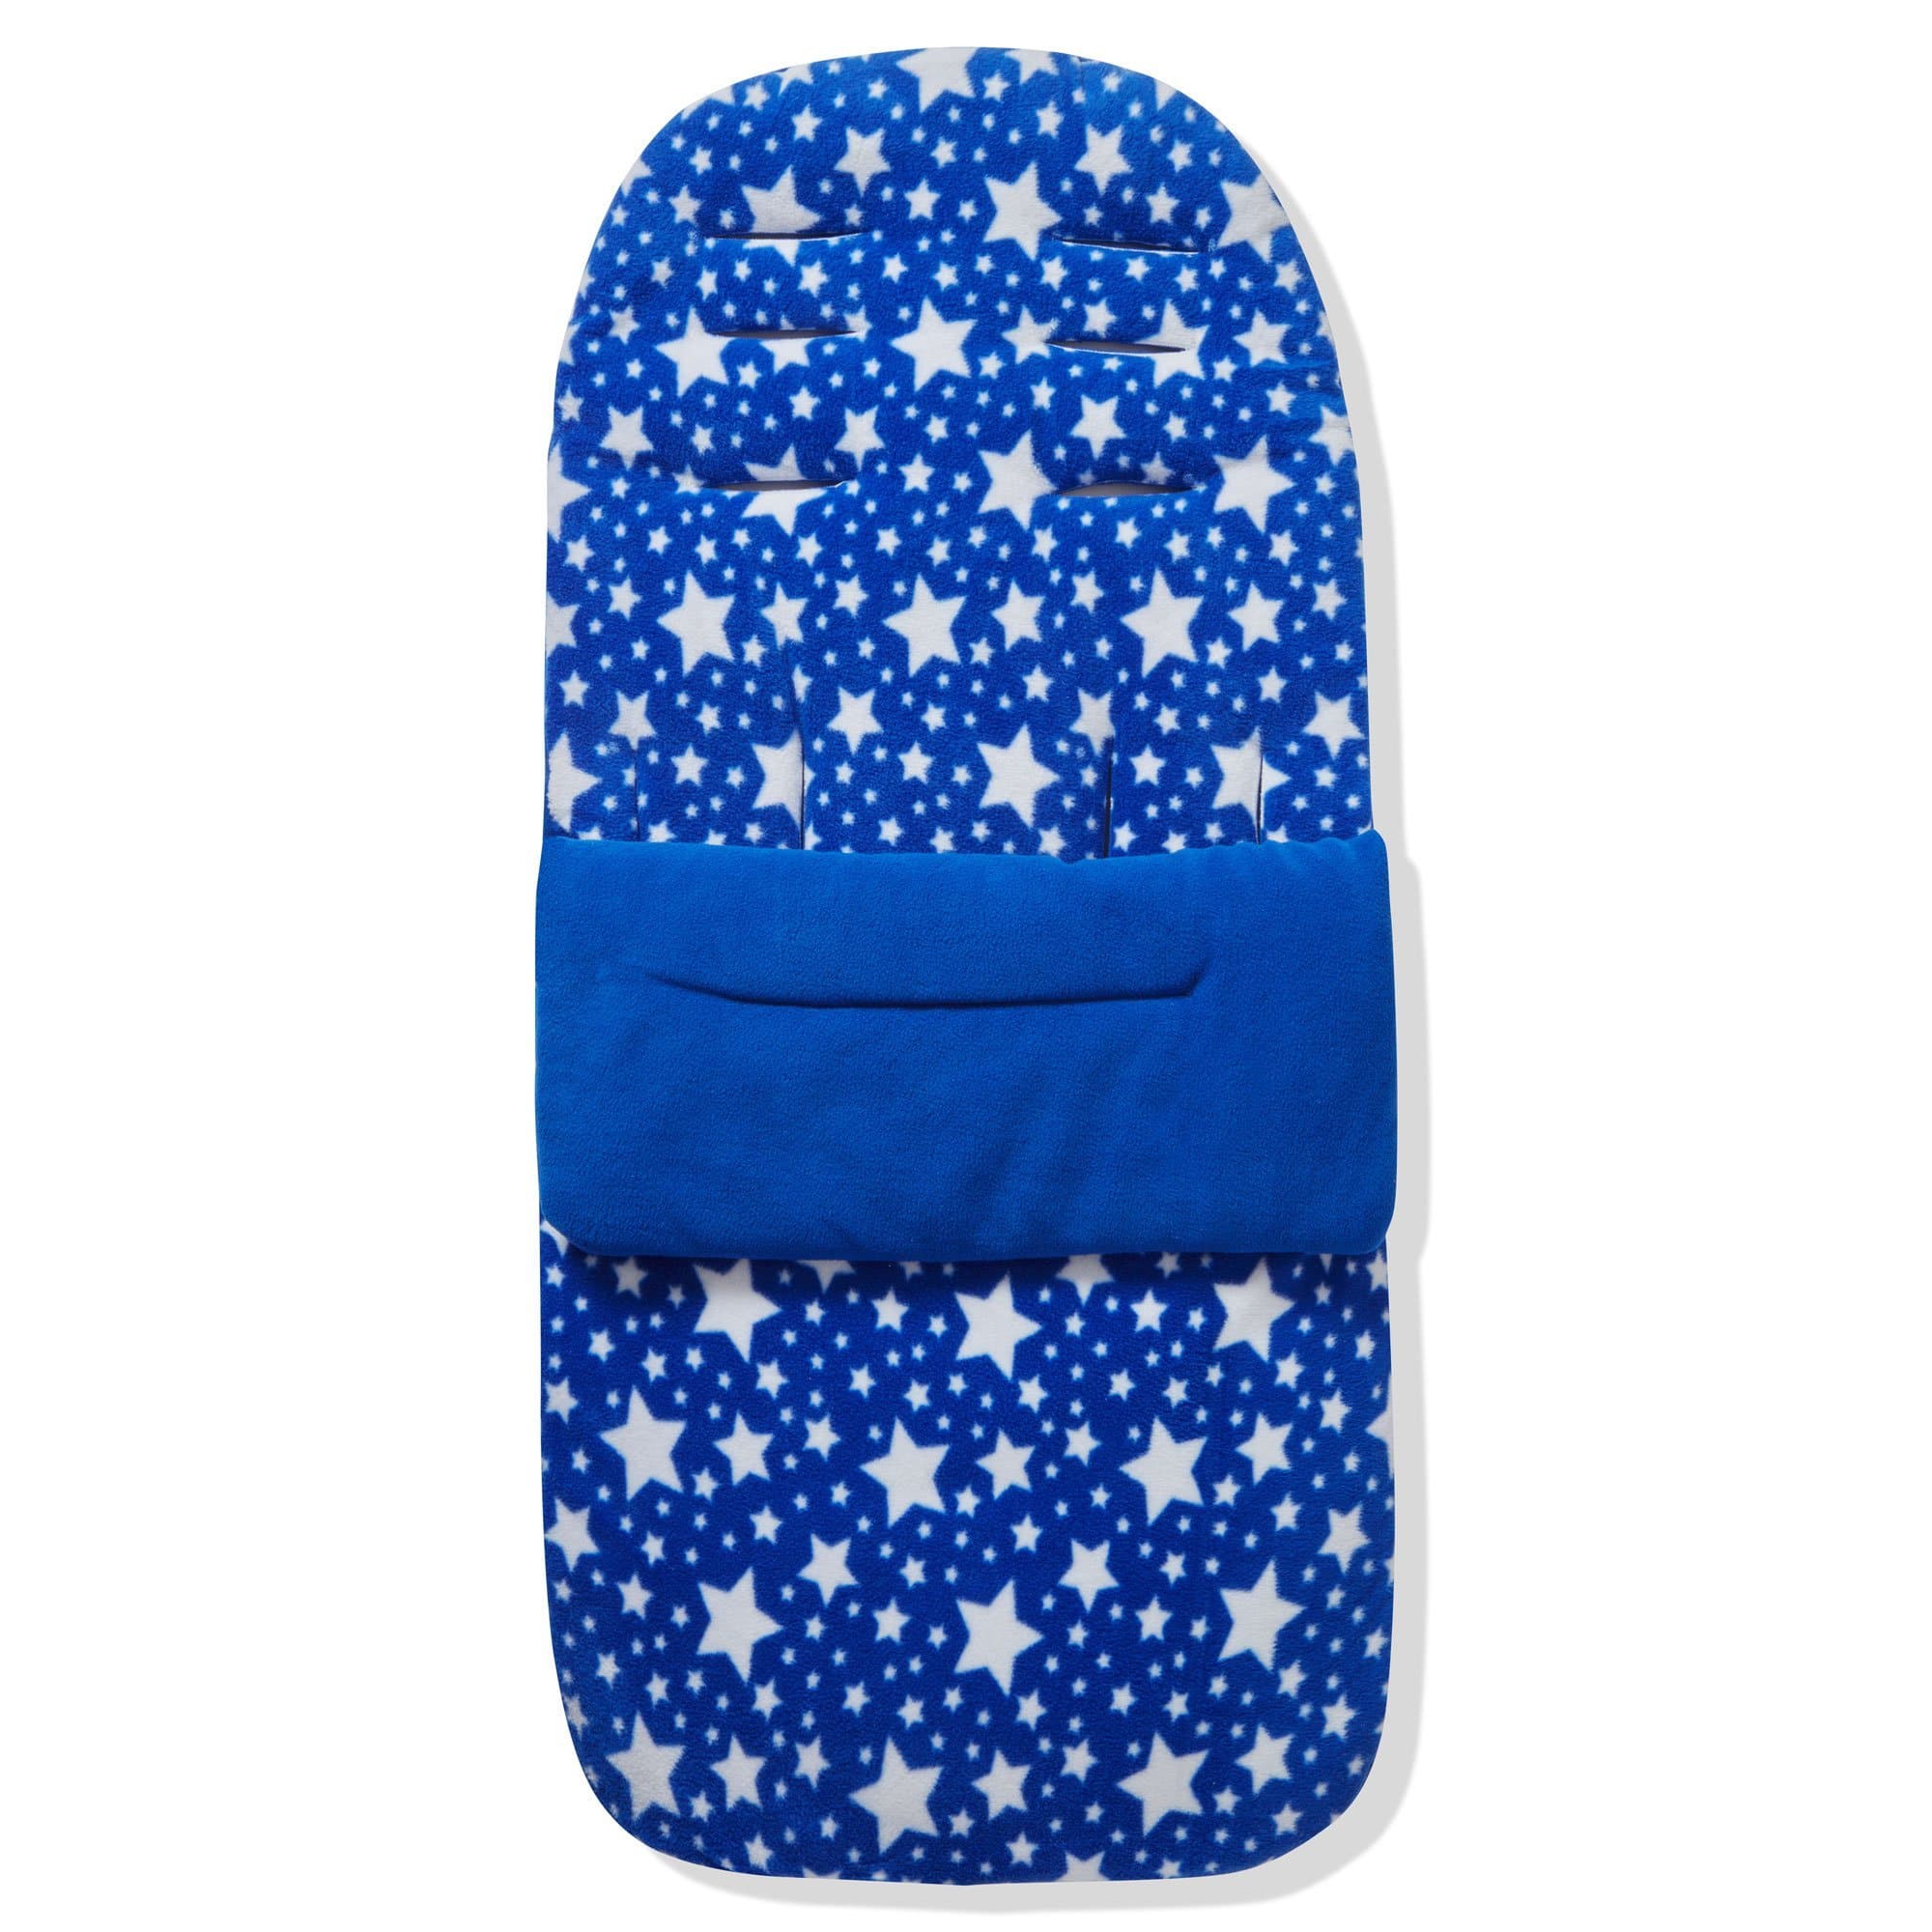 Fleece Footmuff / Cosy Toes Compatible with Joolz - For Your Little One